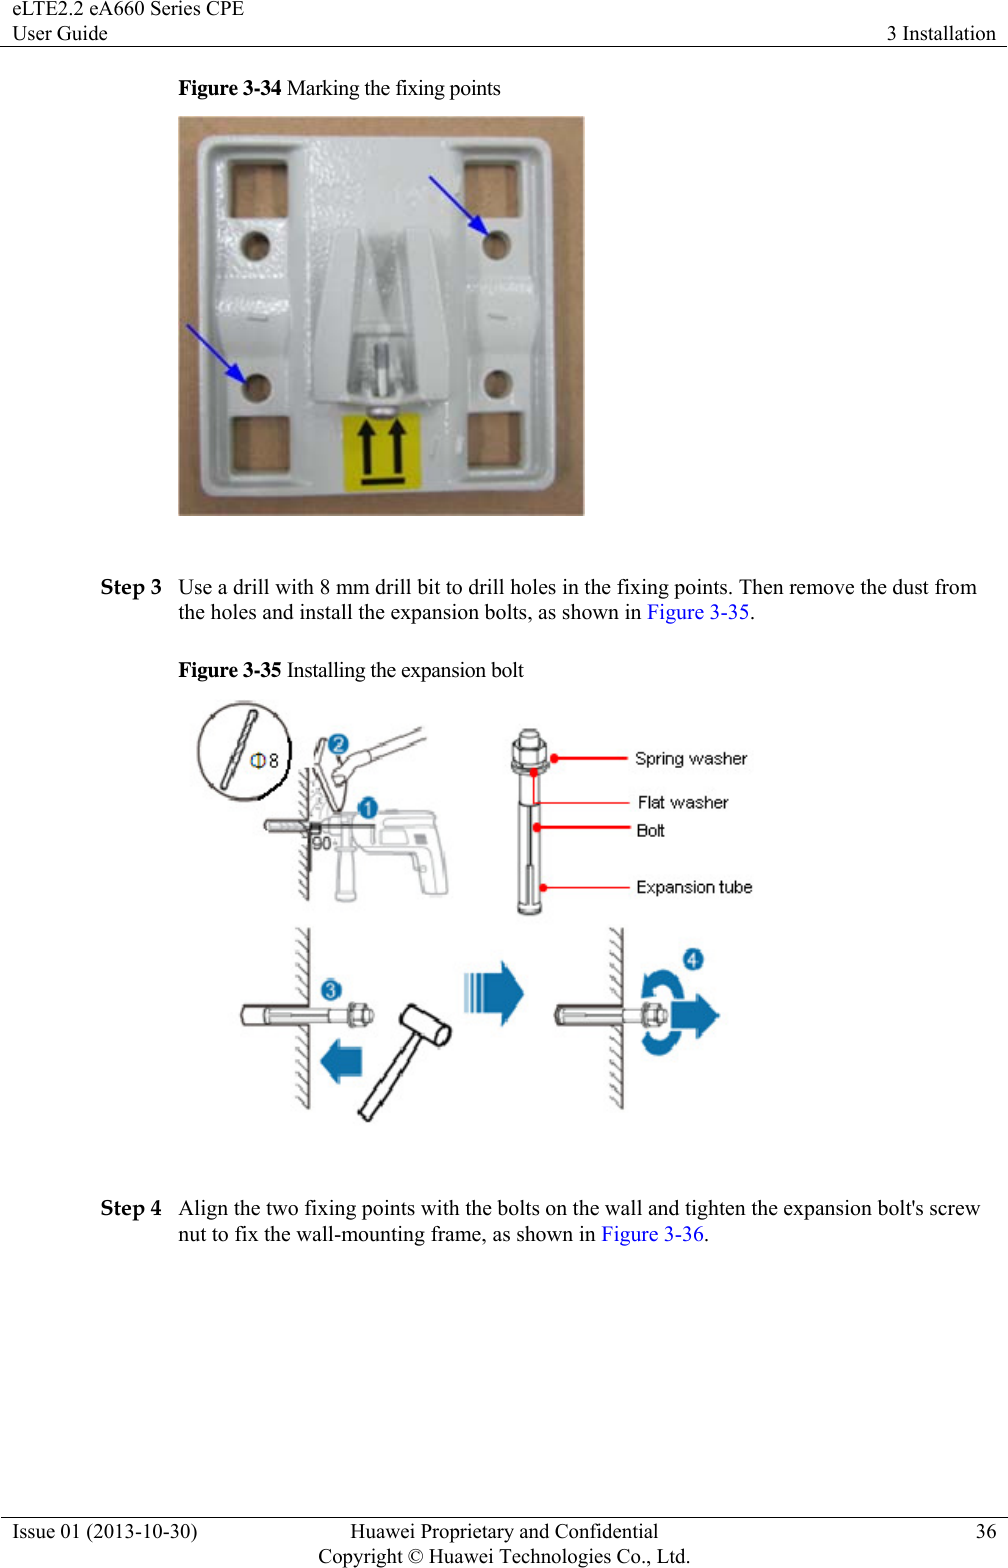 eLTE2.2 eA660 Series CPE User Guide  3 Installation Issue 01 (2013-10-30)  Huawei Proprietary and Confidential         Copyright © Huawei Technologies Co., Ltd.36 Figure 3-34 Marking the fixing points   Step 3 Use a drill with 8 mm drill bit to drill holes in the fixing points. Then remove the dust from the holes and install the expansion bolts, as shown in Figure 3-35. Figure 3-35 Installing the expansion bolt   Step 4 Align the two fixing points with the bolts on the wall and tighten the expansion bolt&apos;s screw nut to fix the wall-mounting frame, as shown in Figure 3-36. 